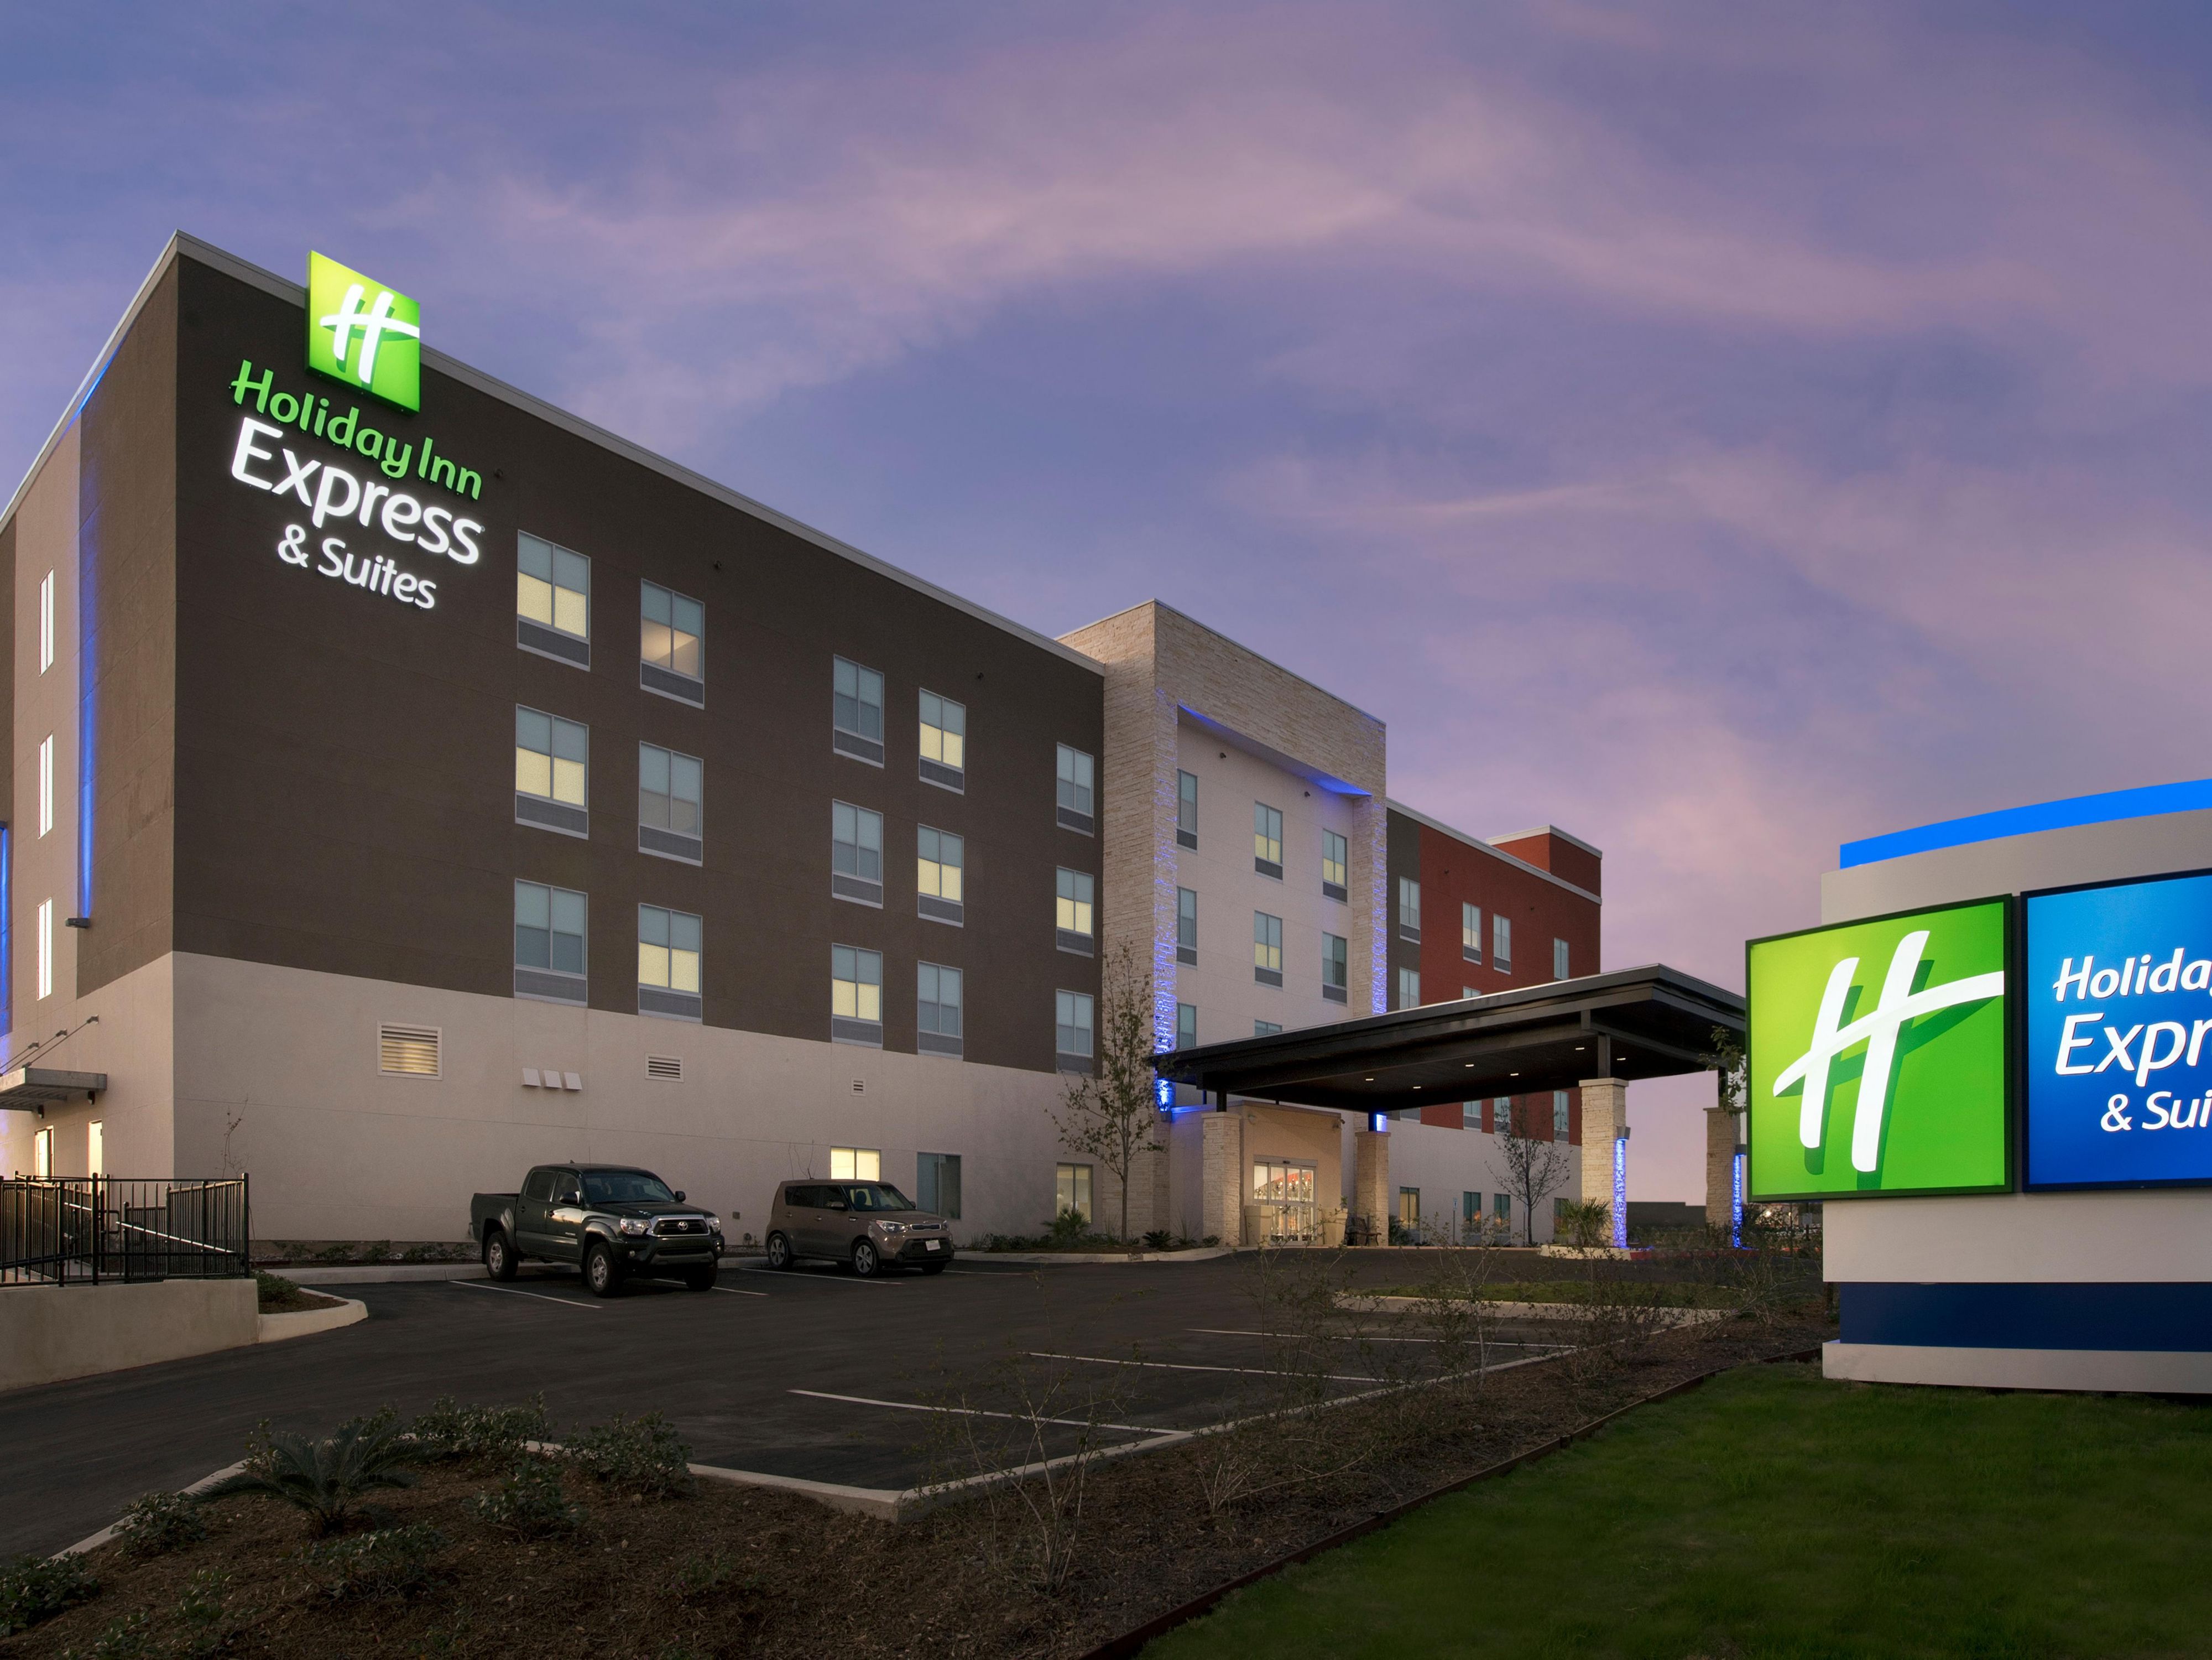 Holiday Inn Express And Suites Windcrest 5313605968 4x3